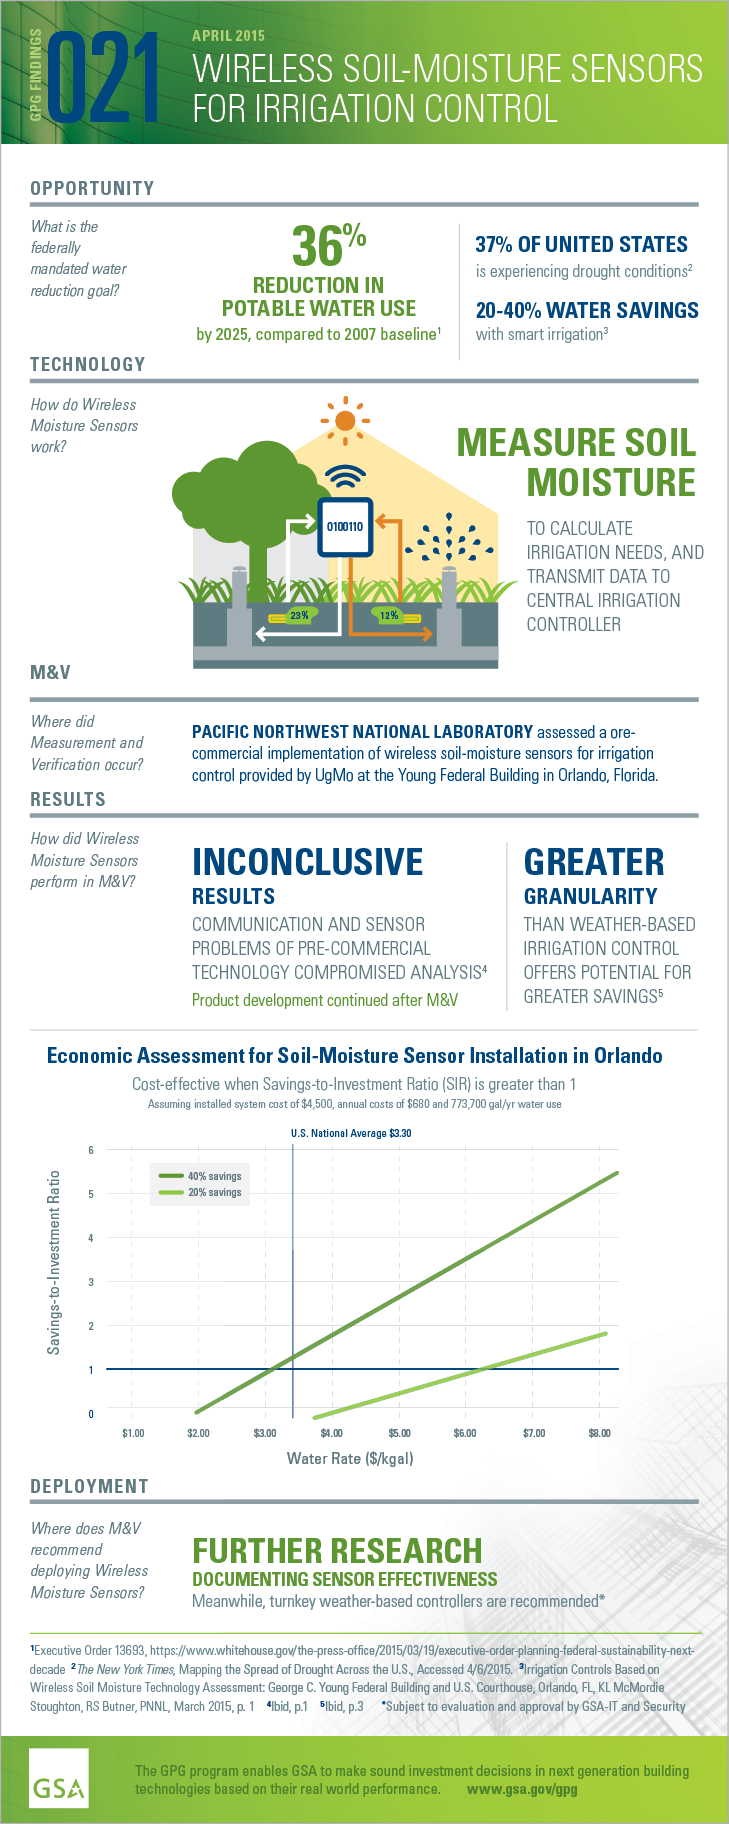 Download the PDF version of the full-sized infographic for GPG021 Wireless Soil-Moisture Sensors.